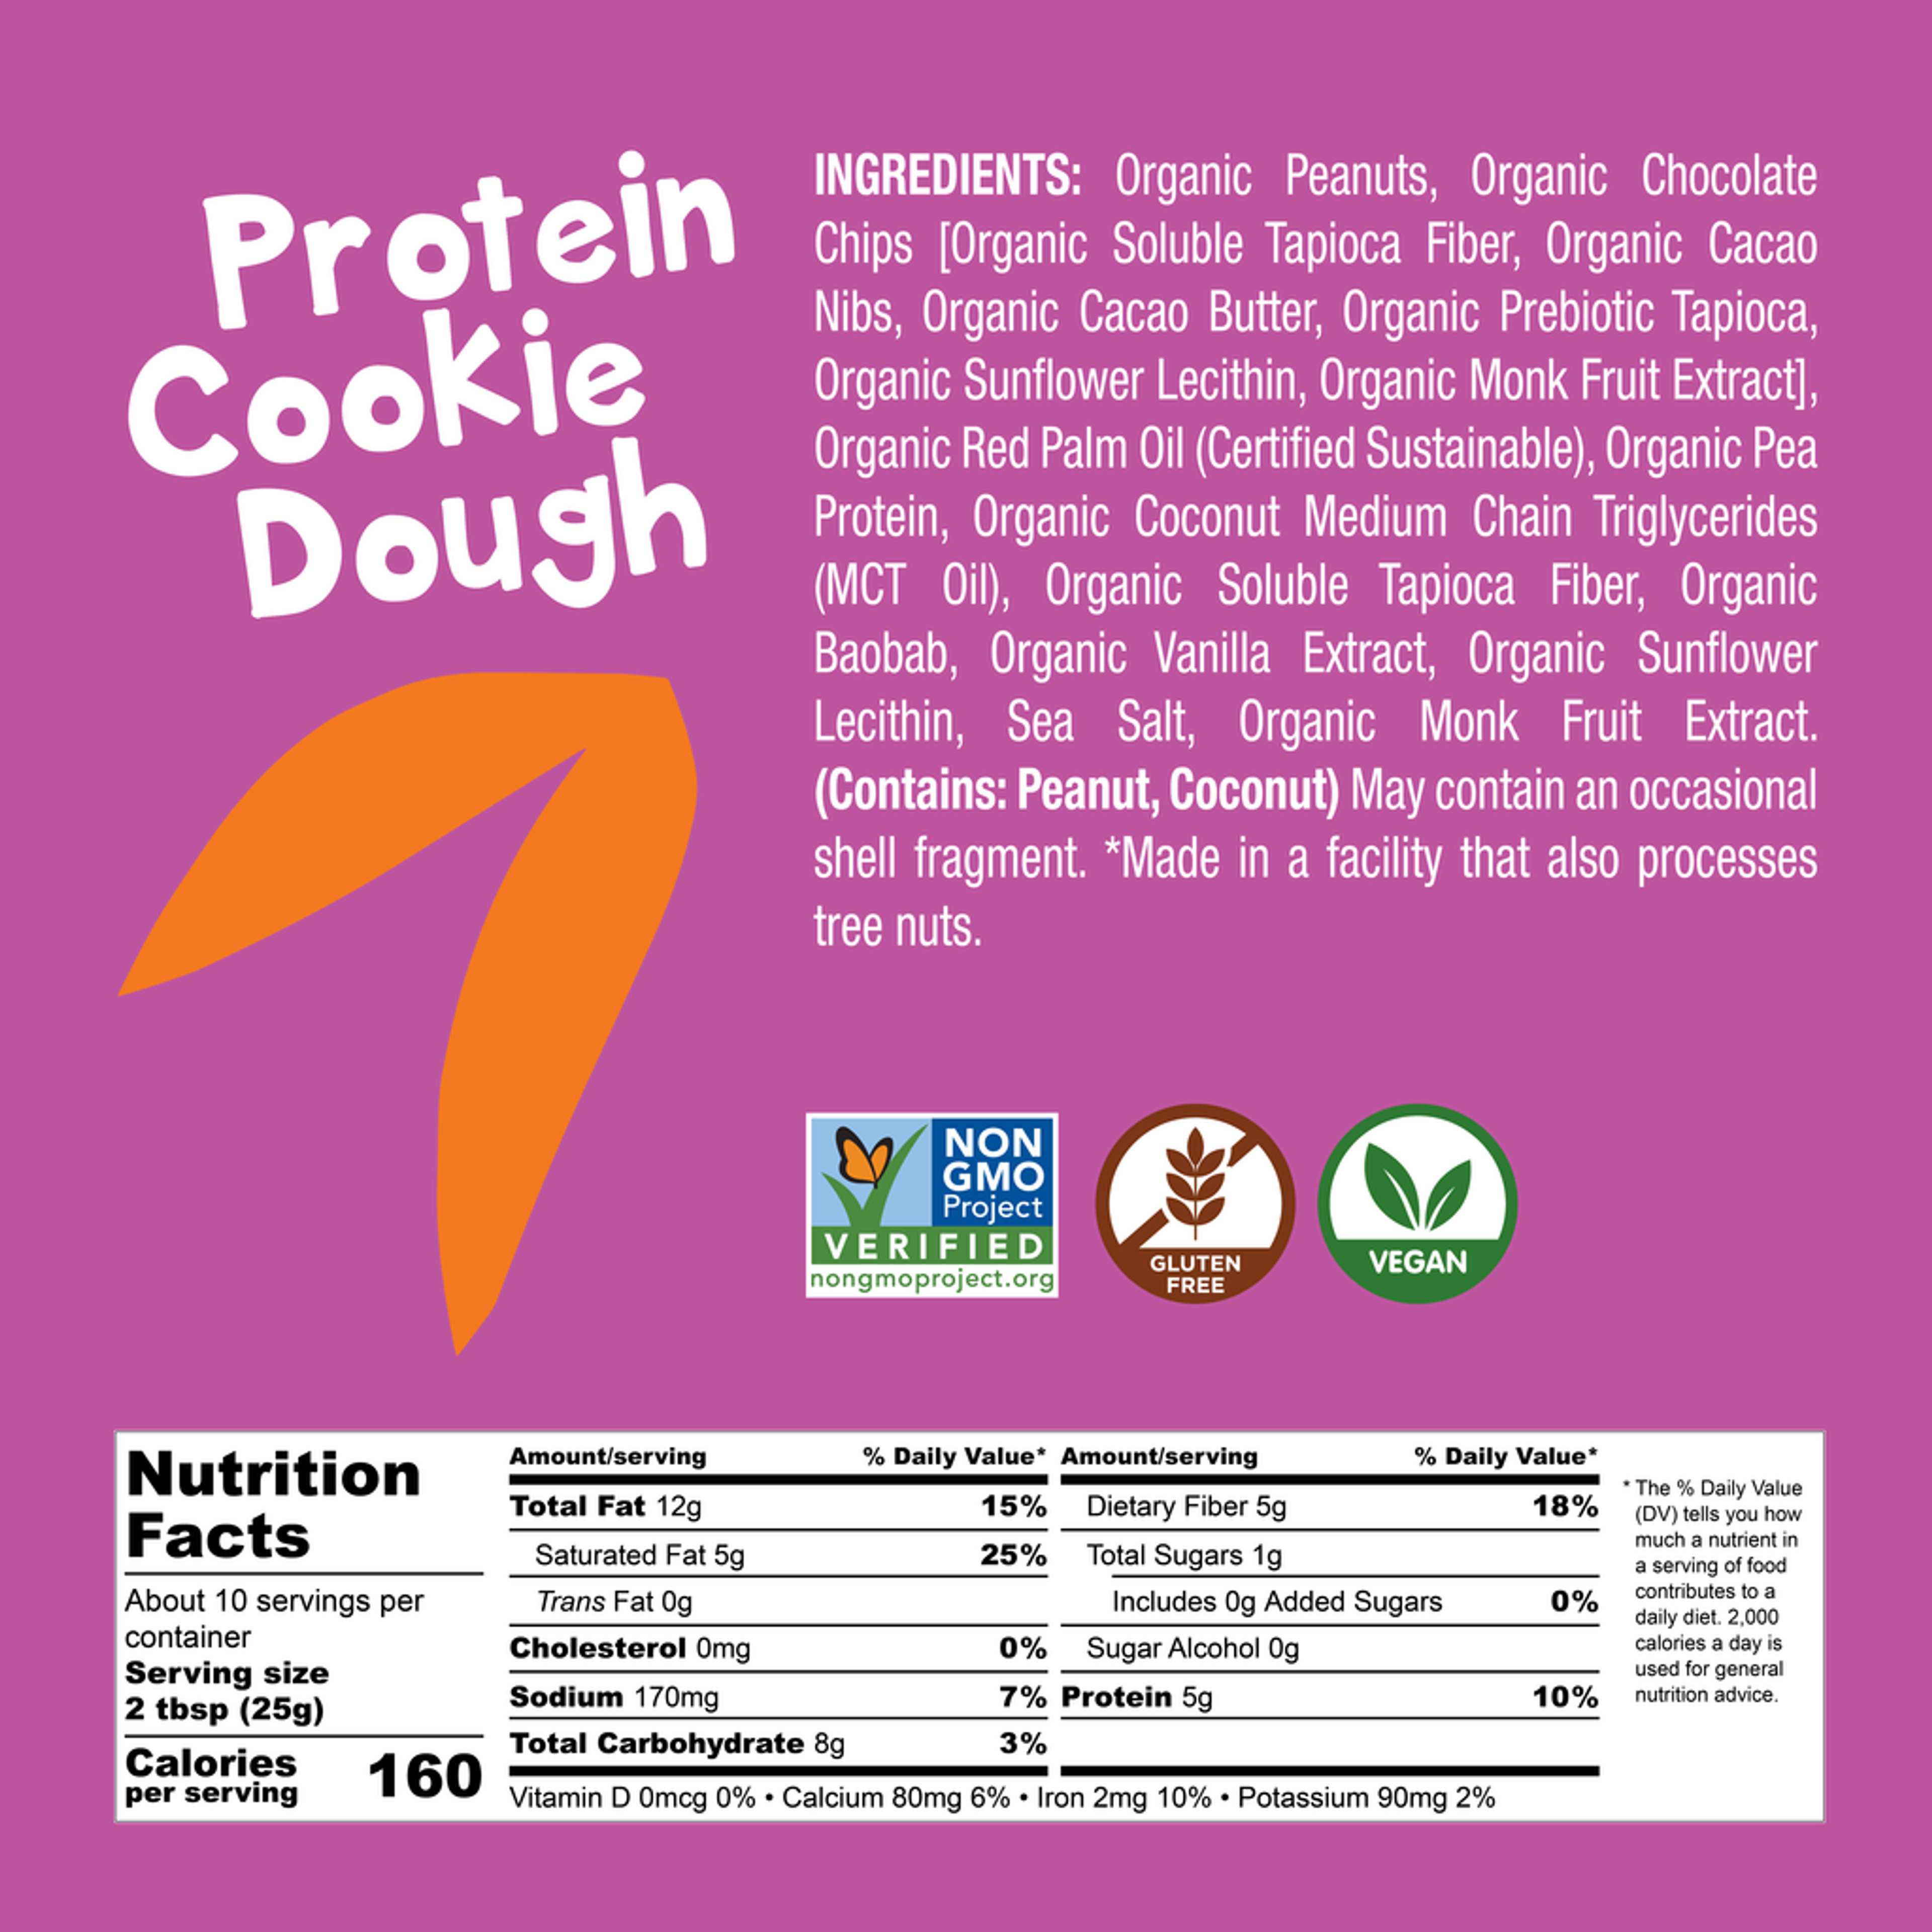 Protein Cookie Dough in a Jar - Peanut Butter Chocolate Chip (2 jars - 9oz each)